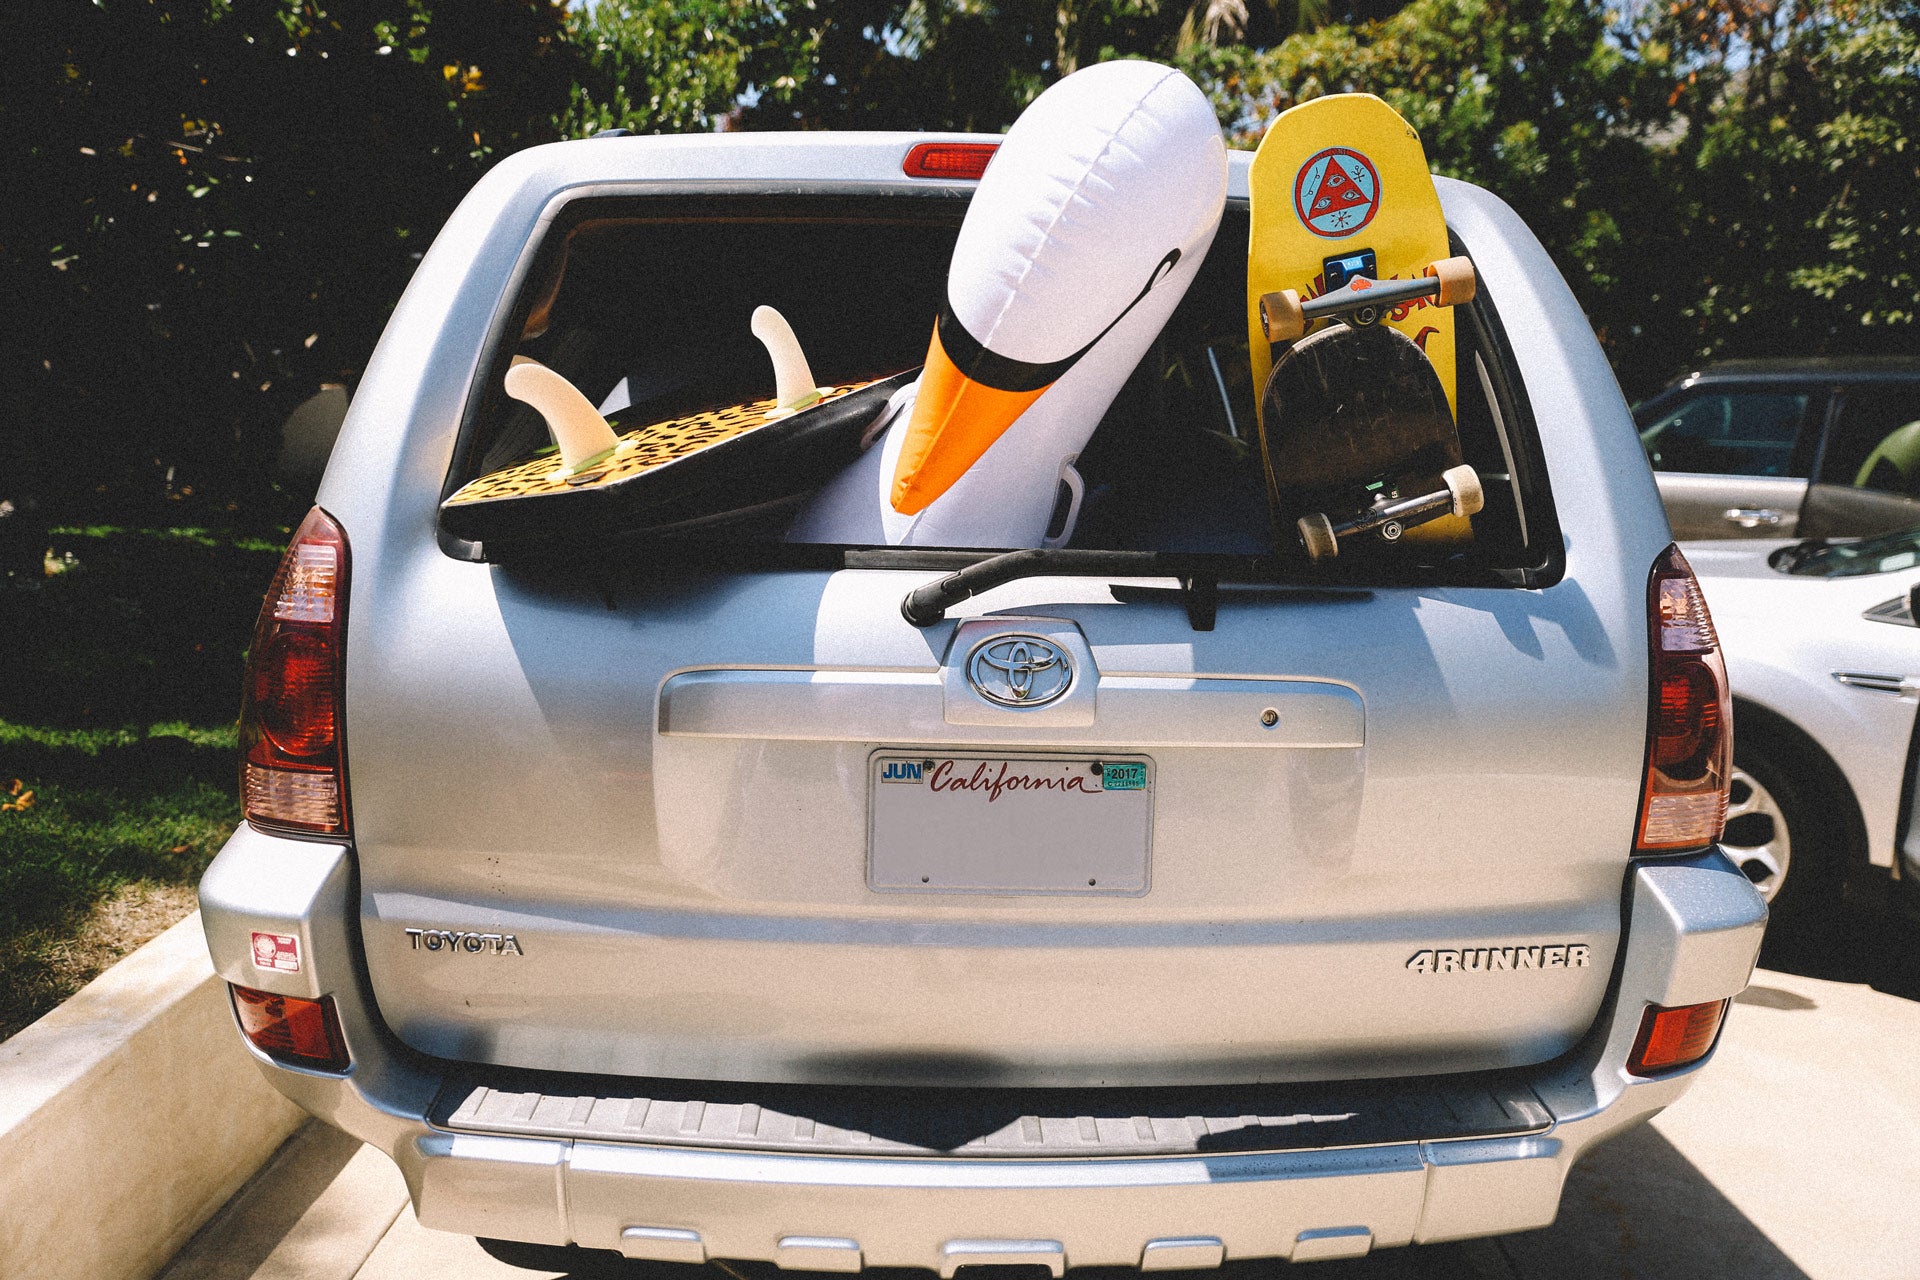 Inflatable Pool Toys in a car